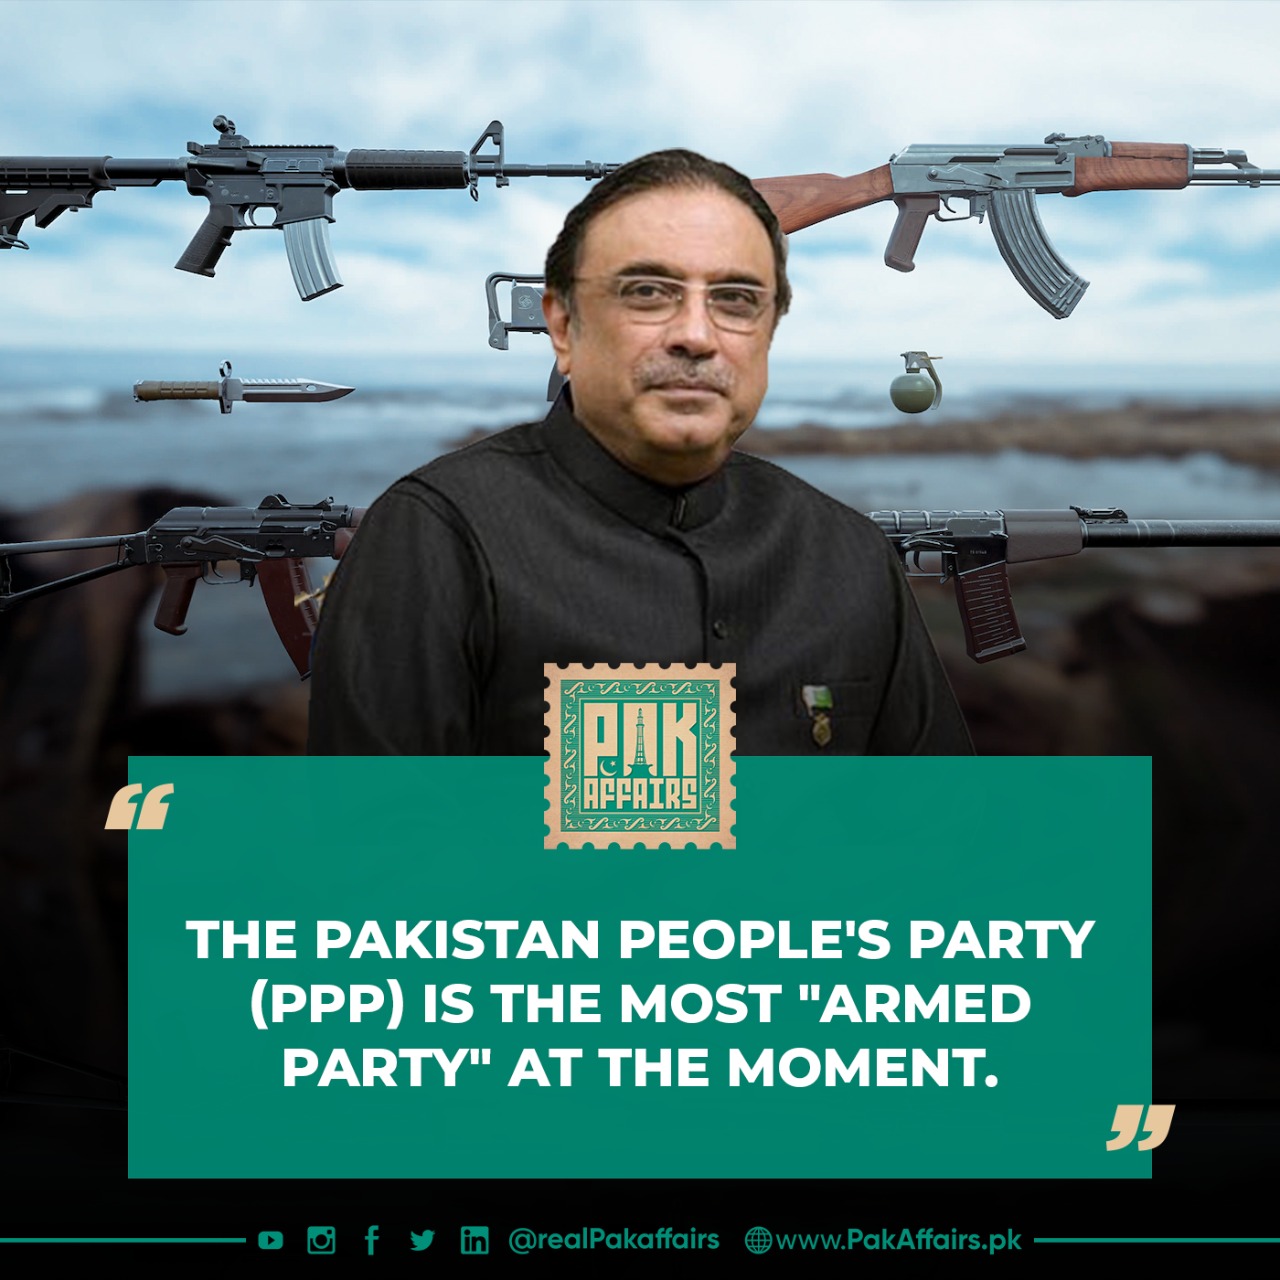 The Pakistan People's Party (PPP) is the most "armed party" at the moment.